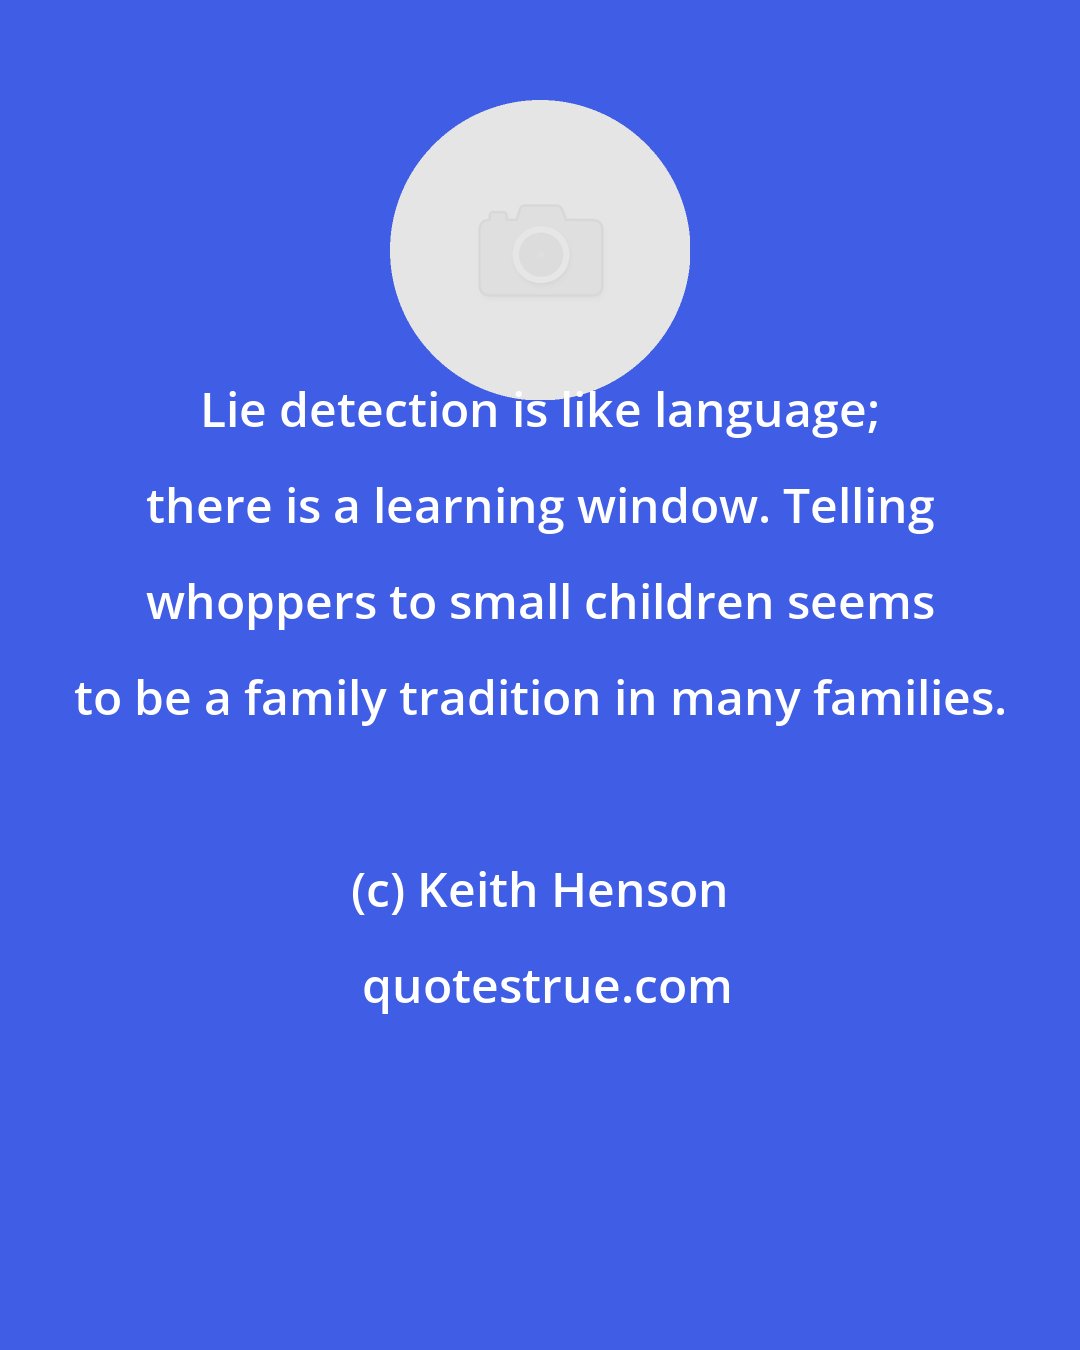 Keith Henson: Lie detection is like language; there is a learning window. Telling whoppers to small children seems to be a family tradition in many families.